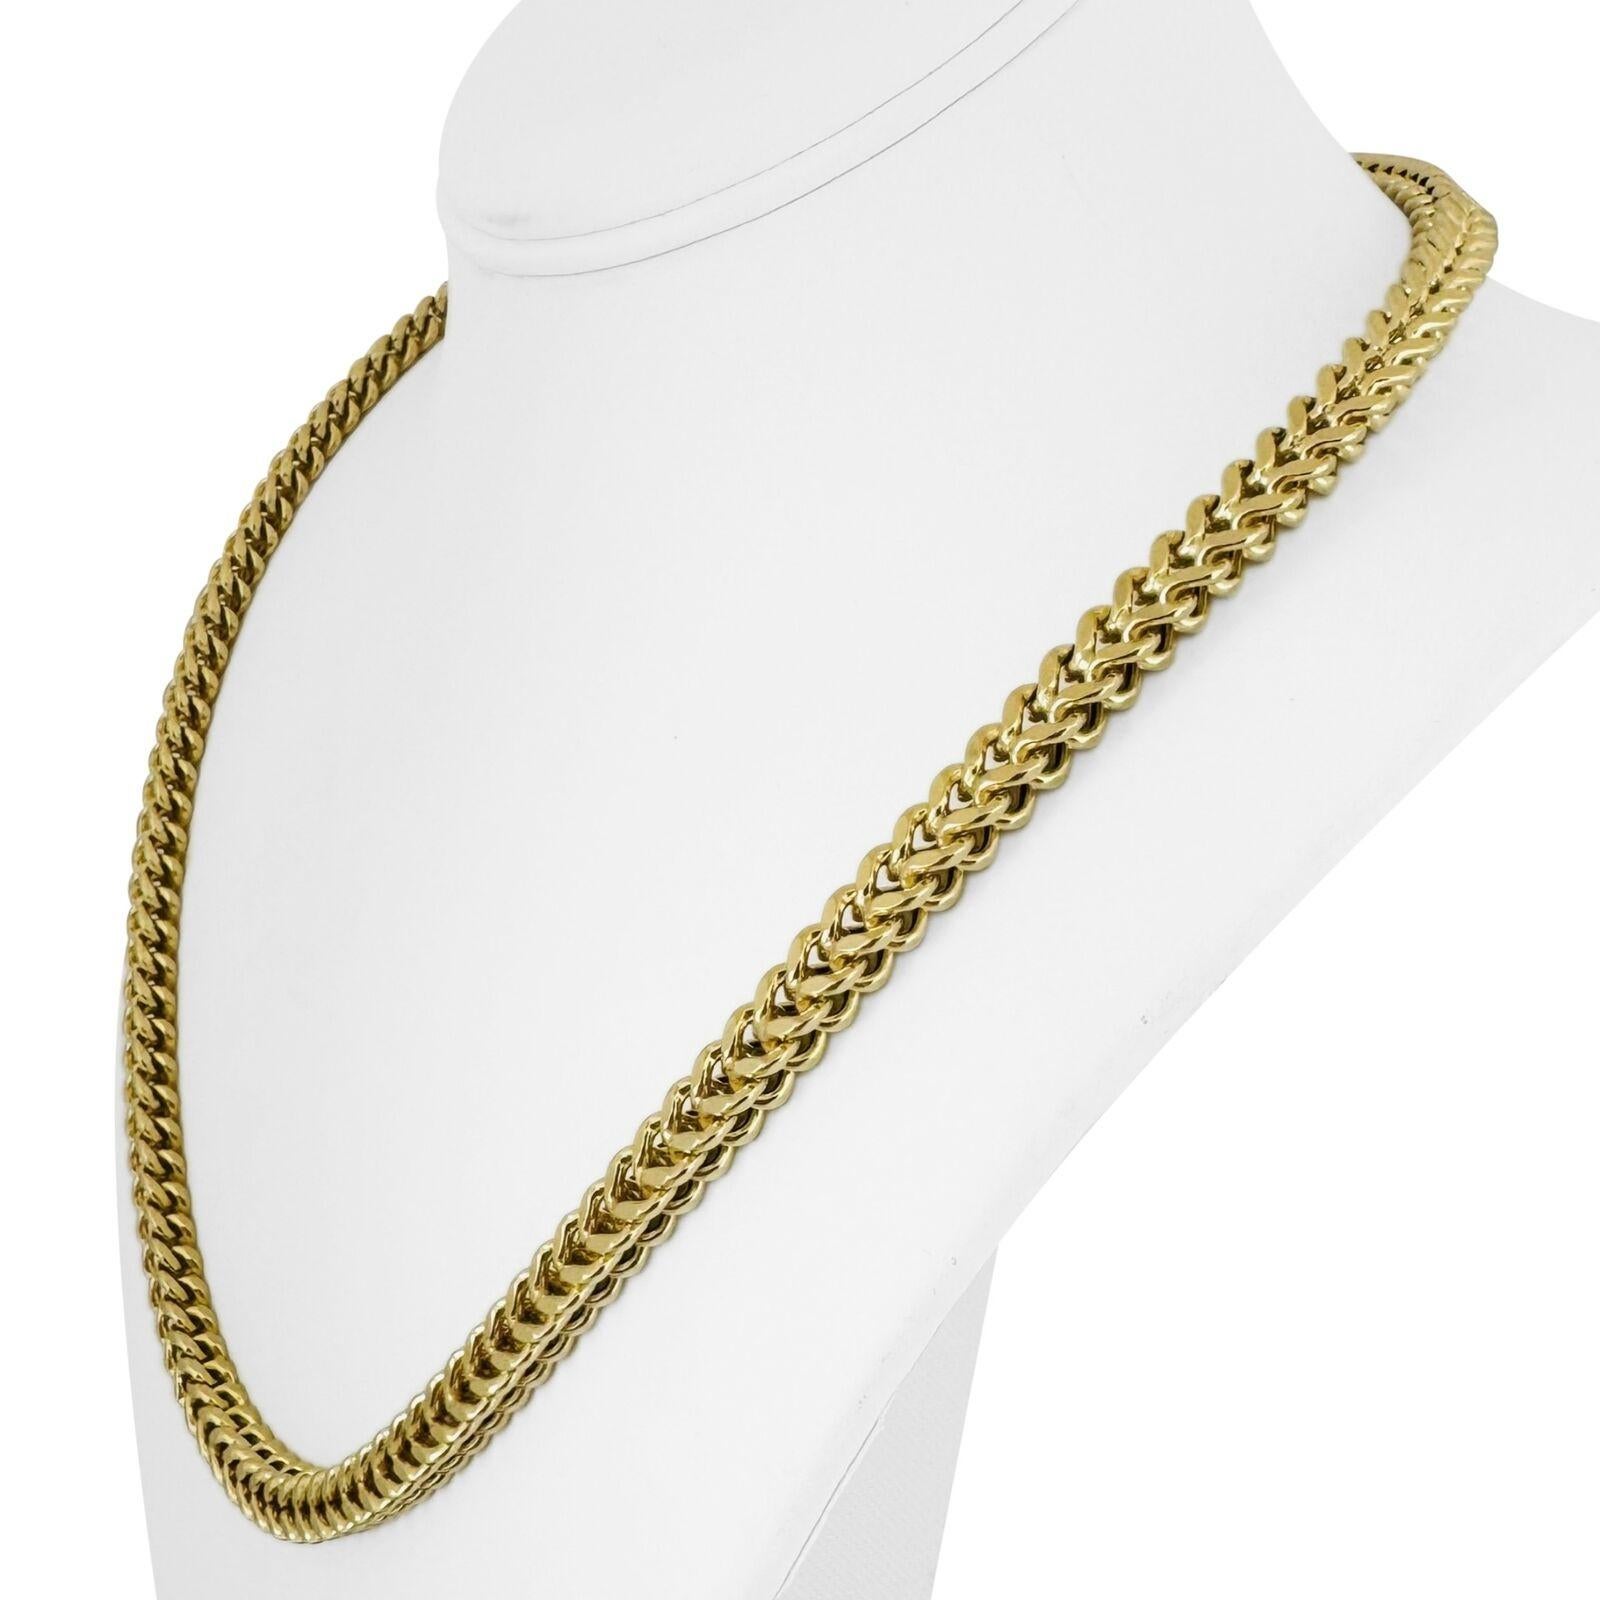 10k Yellow Gold 36g Thick Men's 6mm Squared Franco Link Chain Necklace 21.5